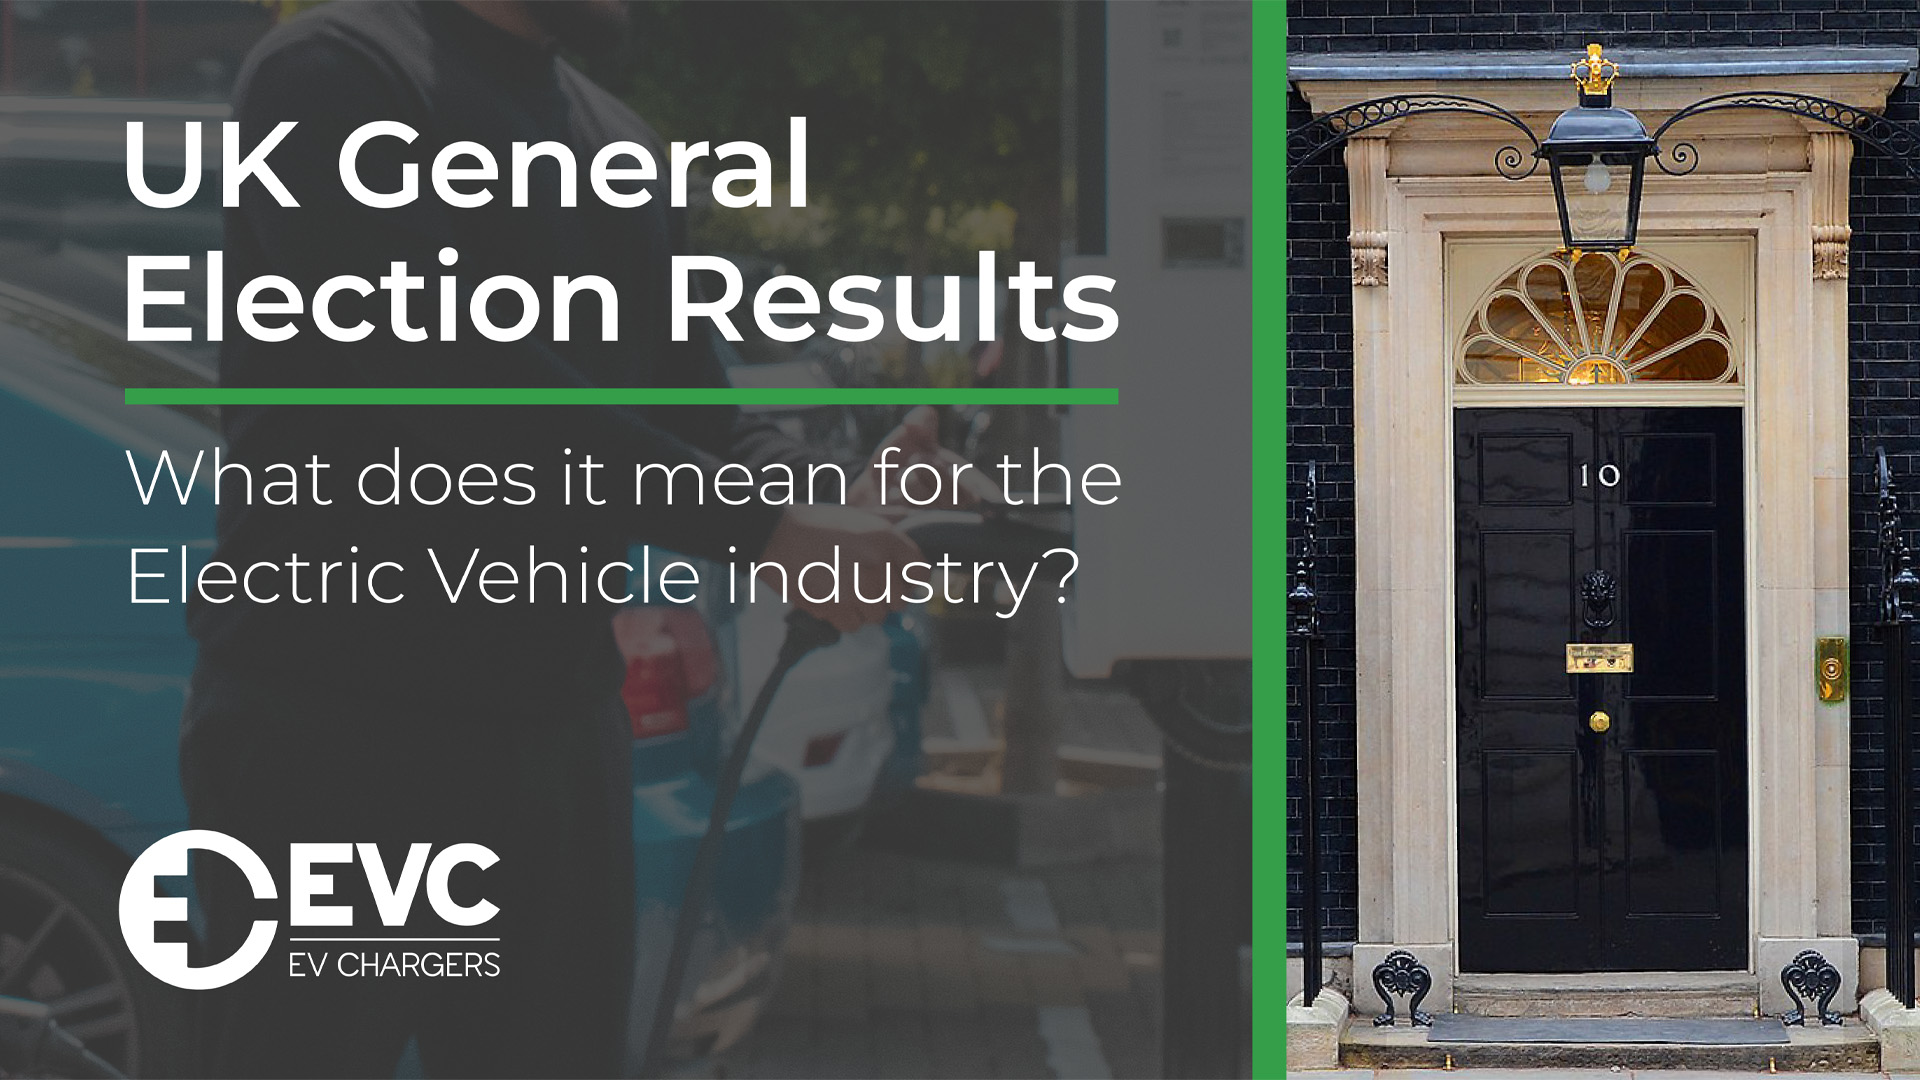 UK General Election Results: What does it mean for the Electric Vehicle Industry?